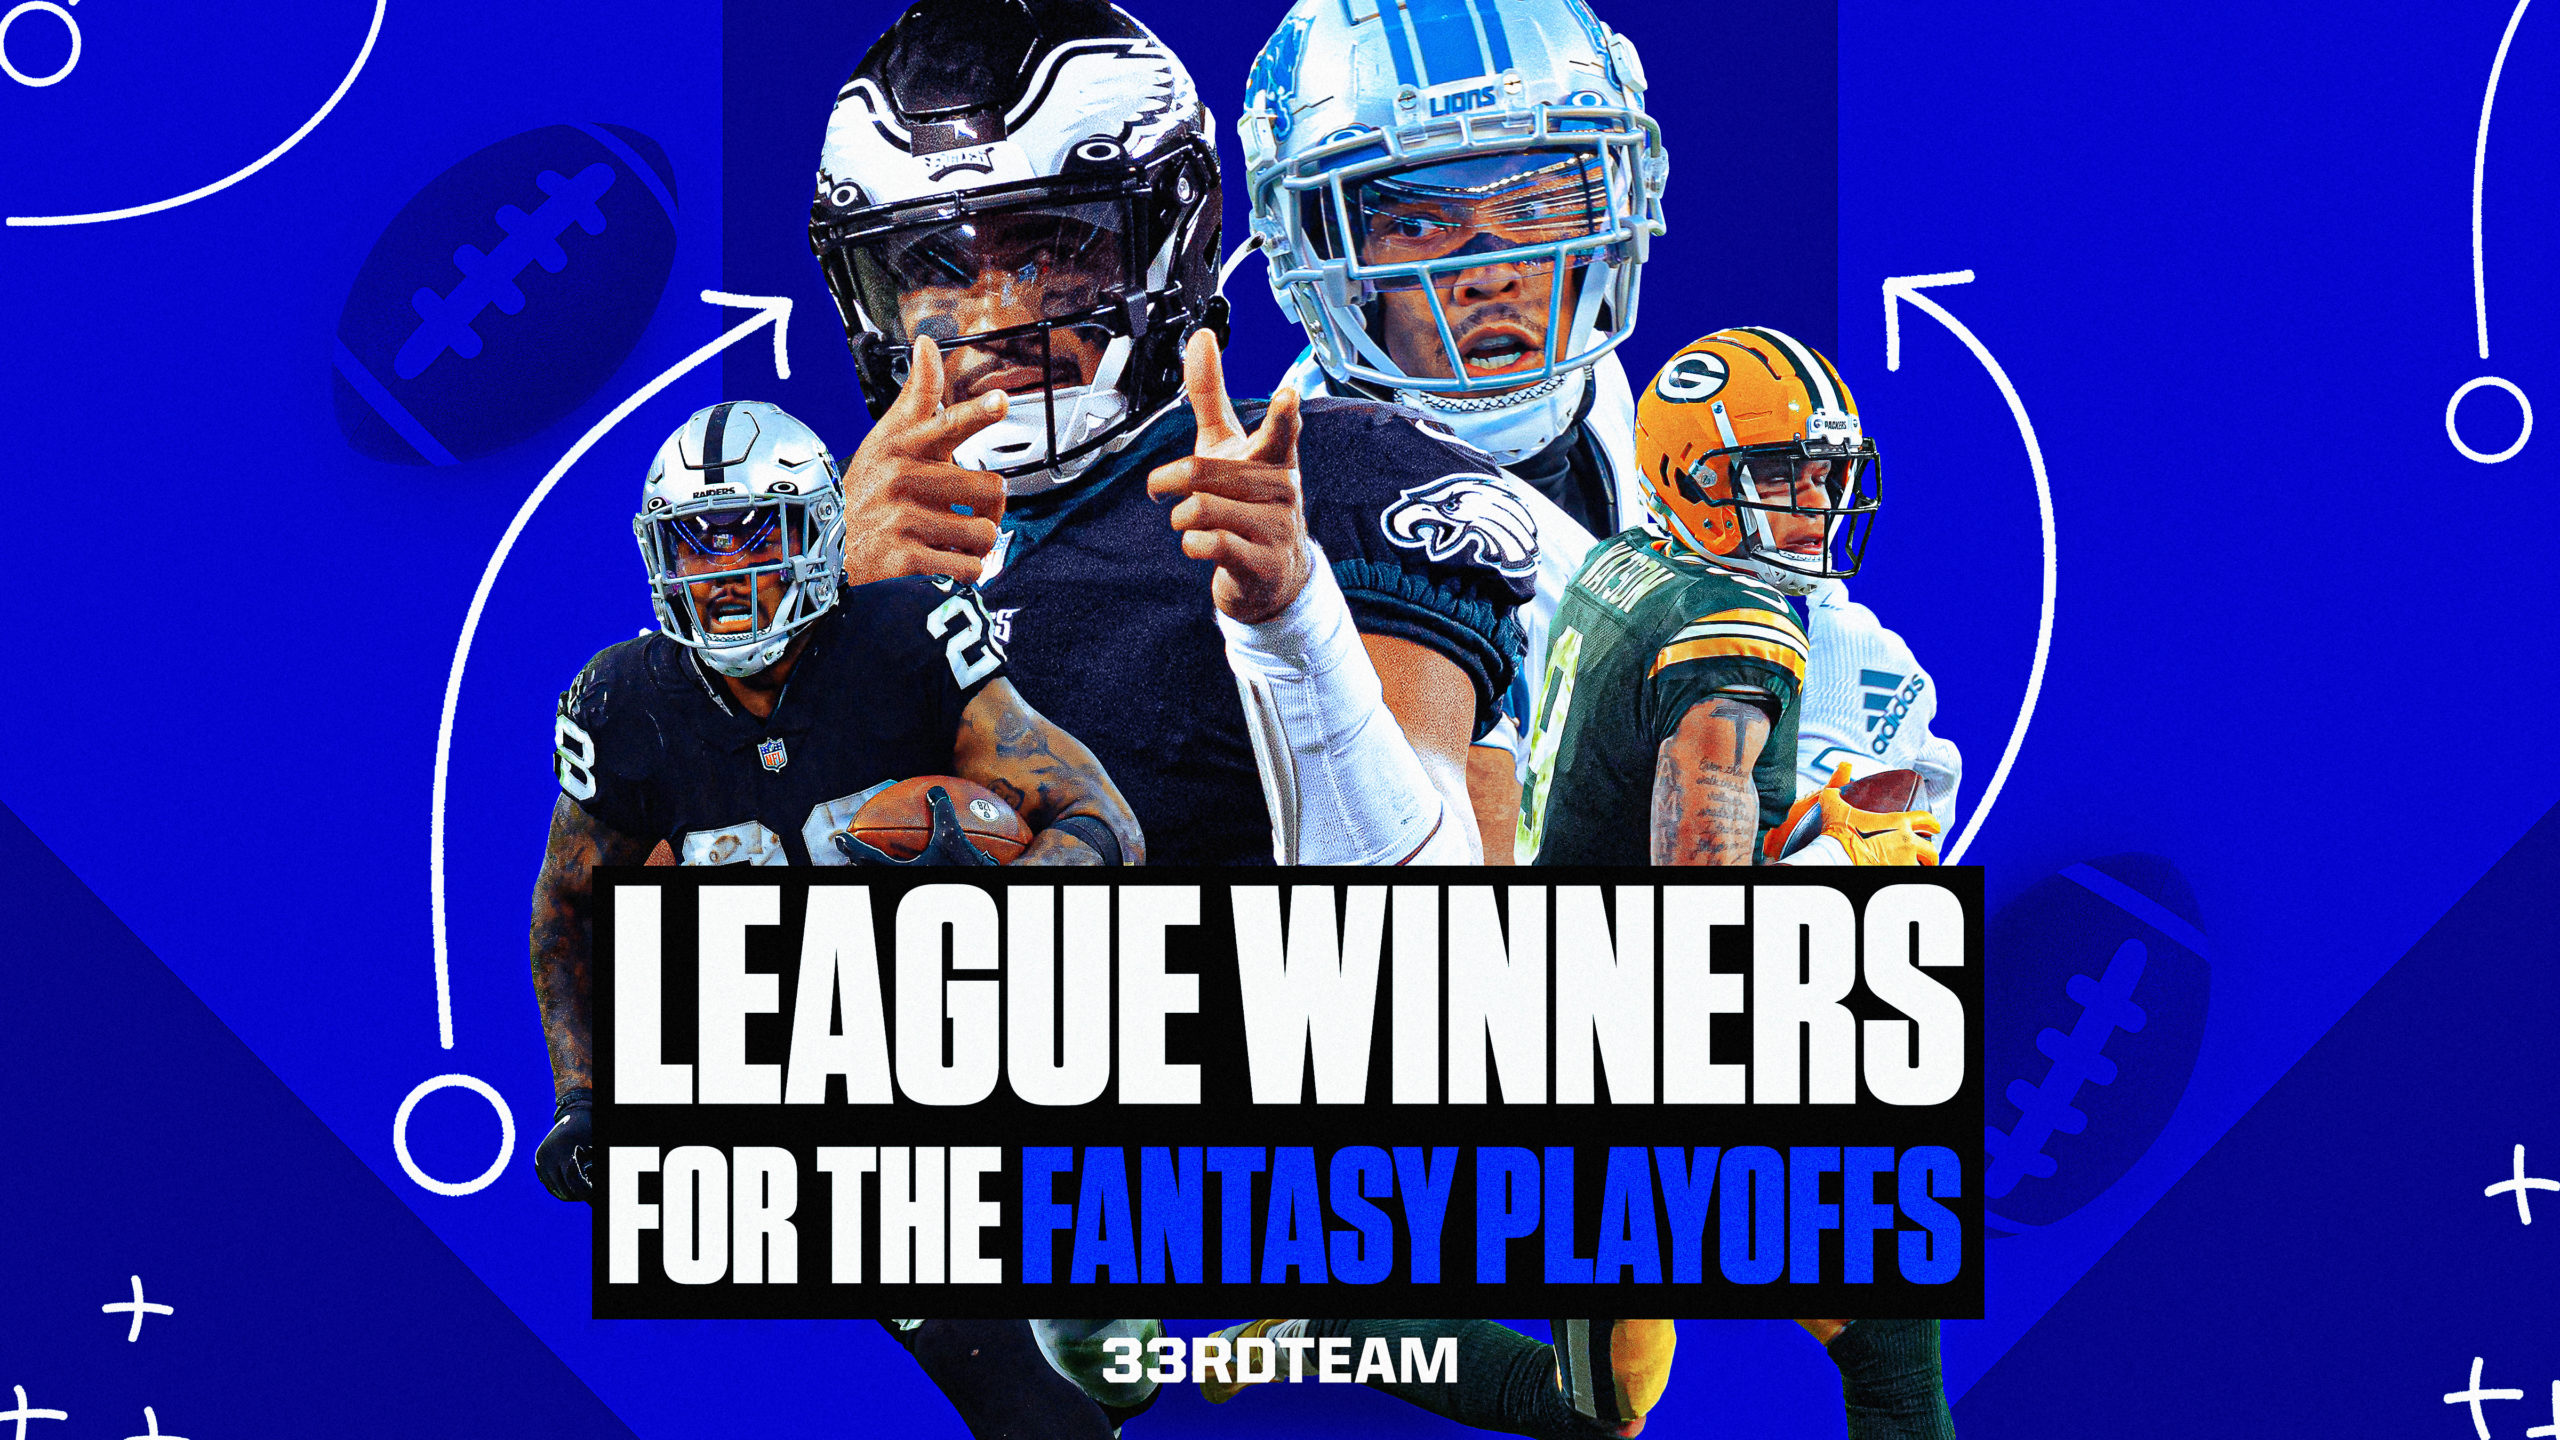 League Winners for Fantasy Football Playoffs